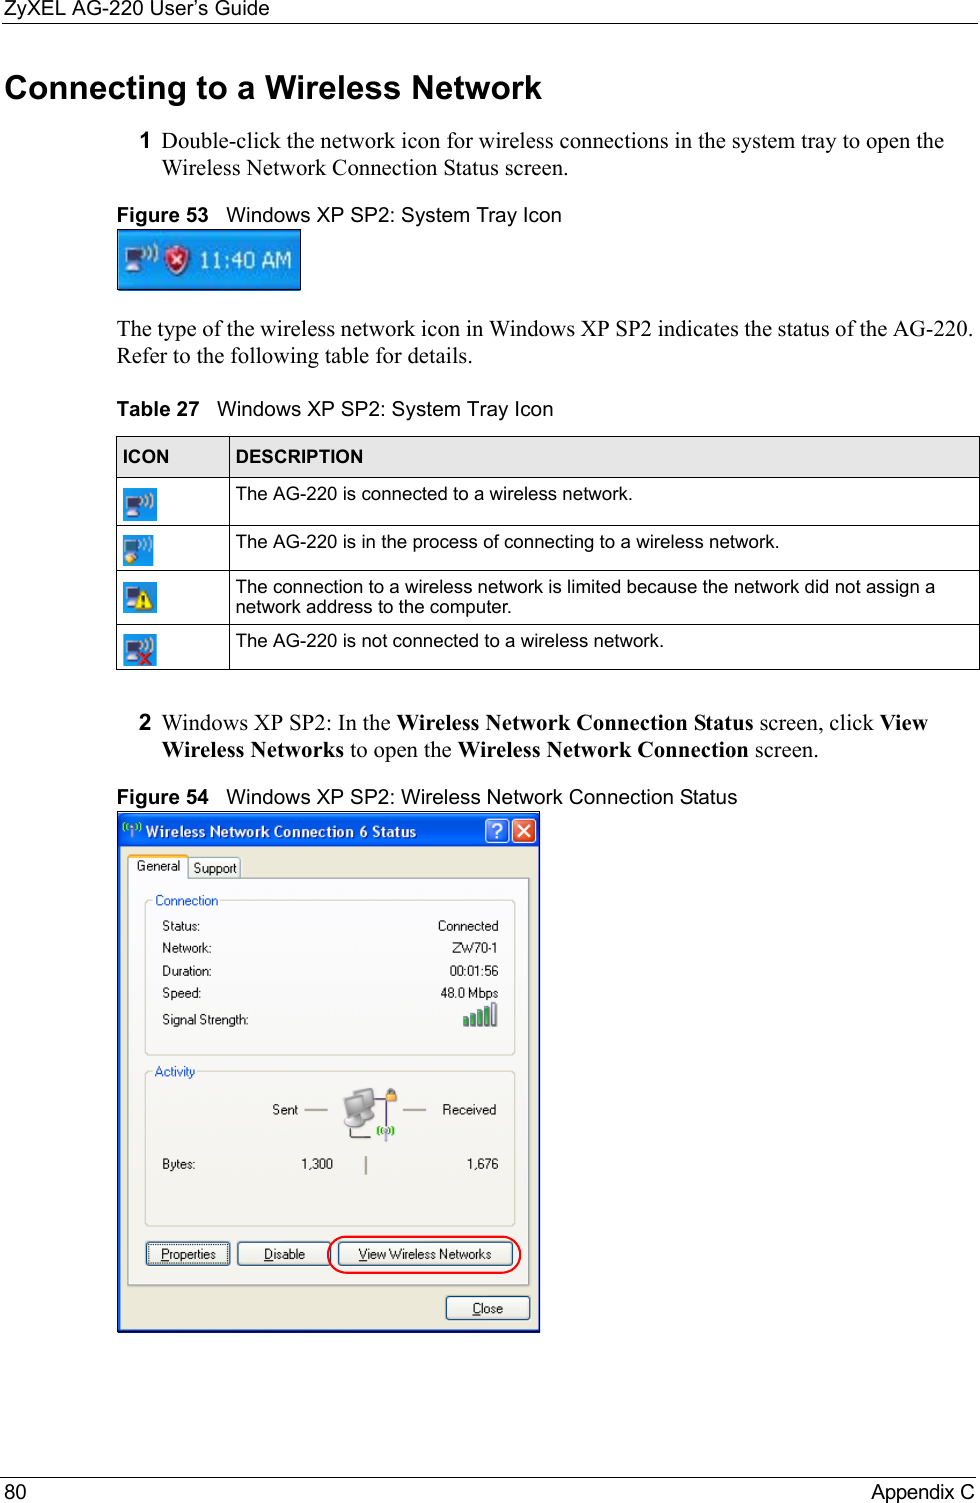 ZyXEL AG-220 User’s Guide80 Appendix CConnecting to a Wireless Network 1Double-click the network icon for wireless connections in the system tray to open the Wireless Network Connection Status screen.Figure 53   Windows XP SP2: System Tray IconThe type of the wireless network icon in Windows XP SP2 indicates the status of the AG-220. Refer to the following table for details.2Windows XP SP2: In the Wireless Network Connection Status screen, click View Wireless Networks to open the Wireless Network Connection screen.Figure 54   Windows XP SP2: Wireless Network Connection StatusTable 27   Windows XP SP2: System Tray IconICON DESCRIPTIONThe AG-220 is connected to a wireless network.The AG-220 is in the process of connecting to a wireless network.The connection to a wireless network is limited because the network did not assign a network address to the computer.The AG-220 is not connected to a wireless network.